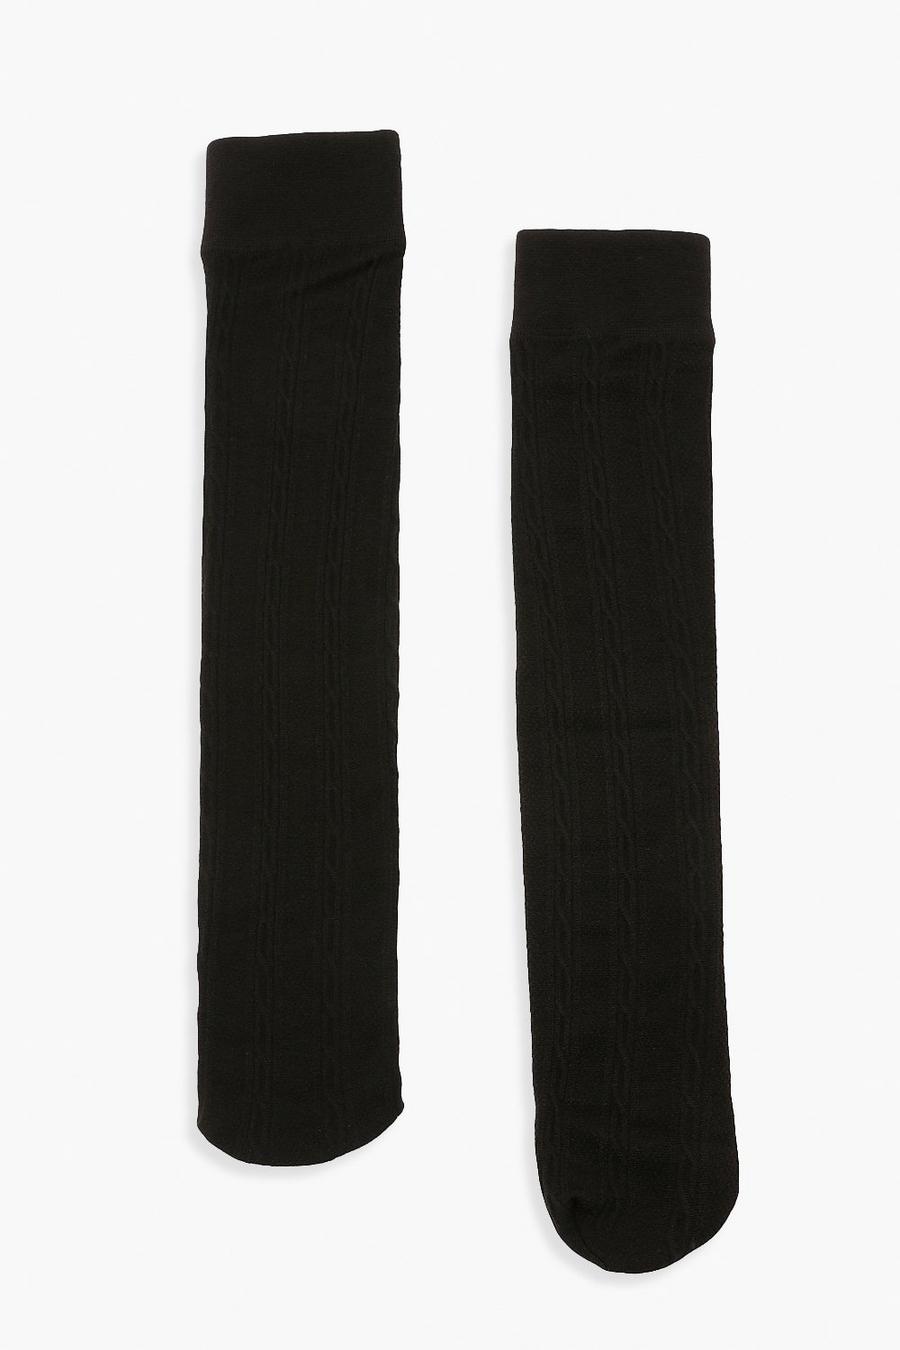 Black Single Thermal Cable Knit Knee High Socks image number 1